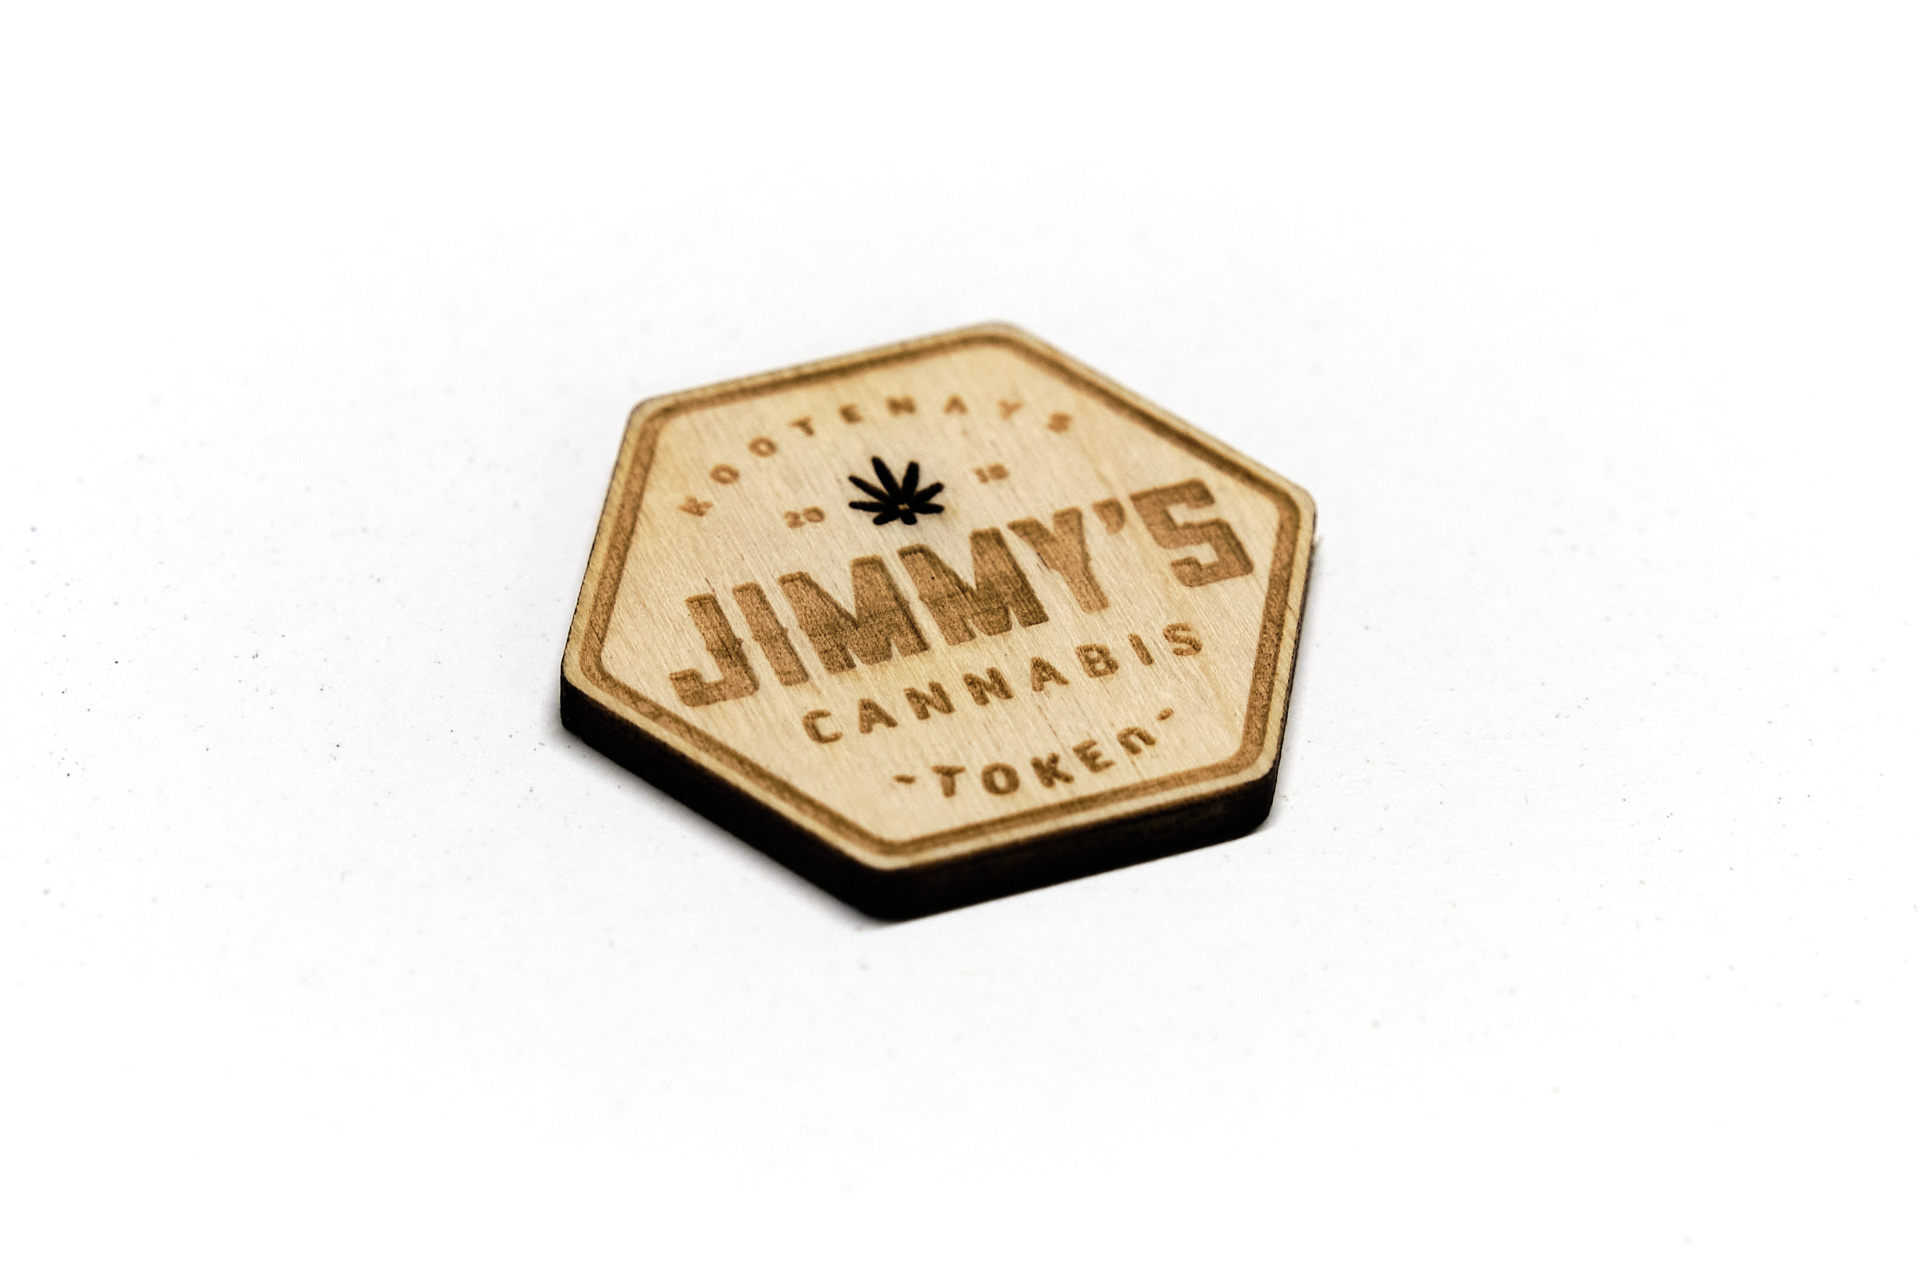 Jimmy's store tokens